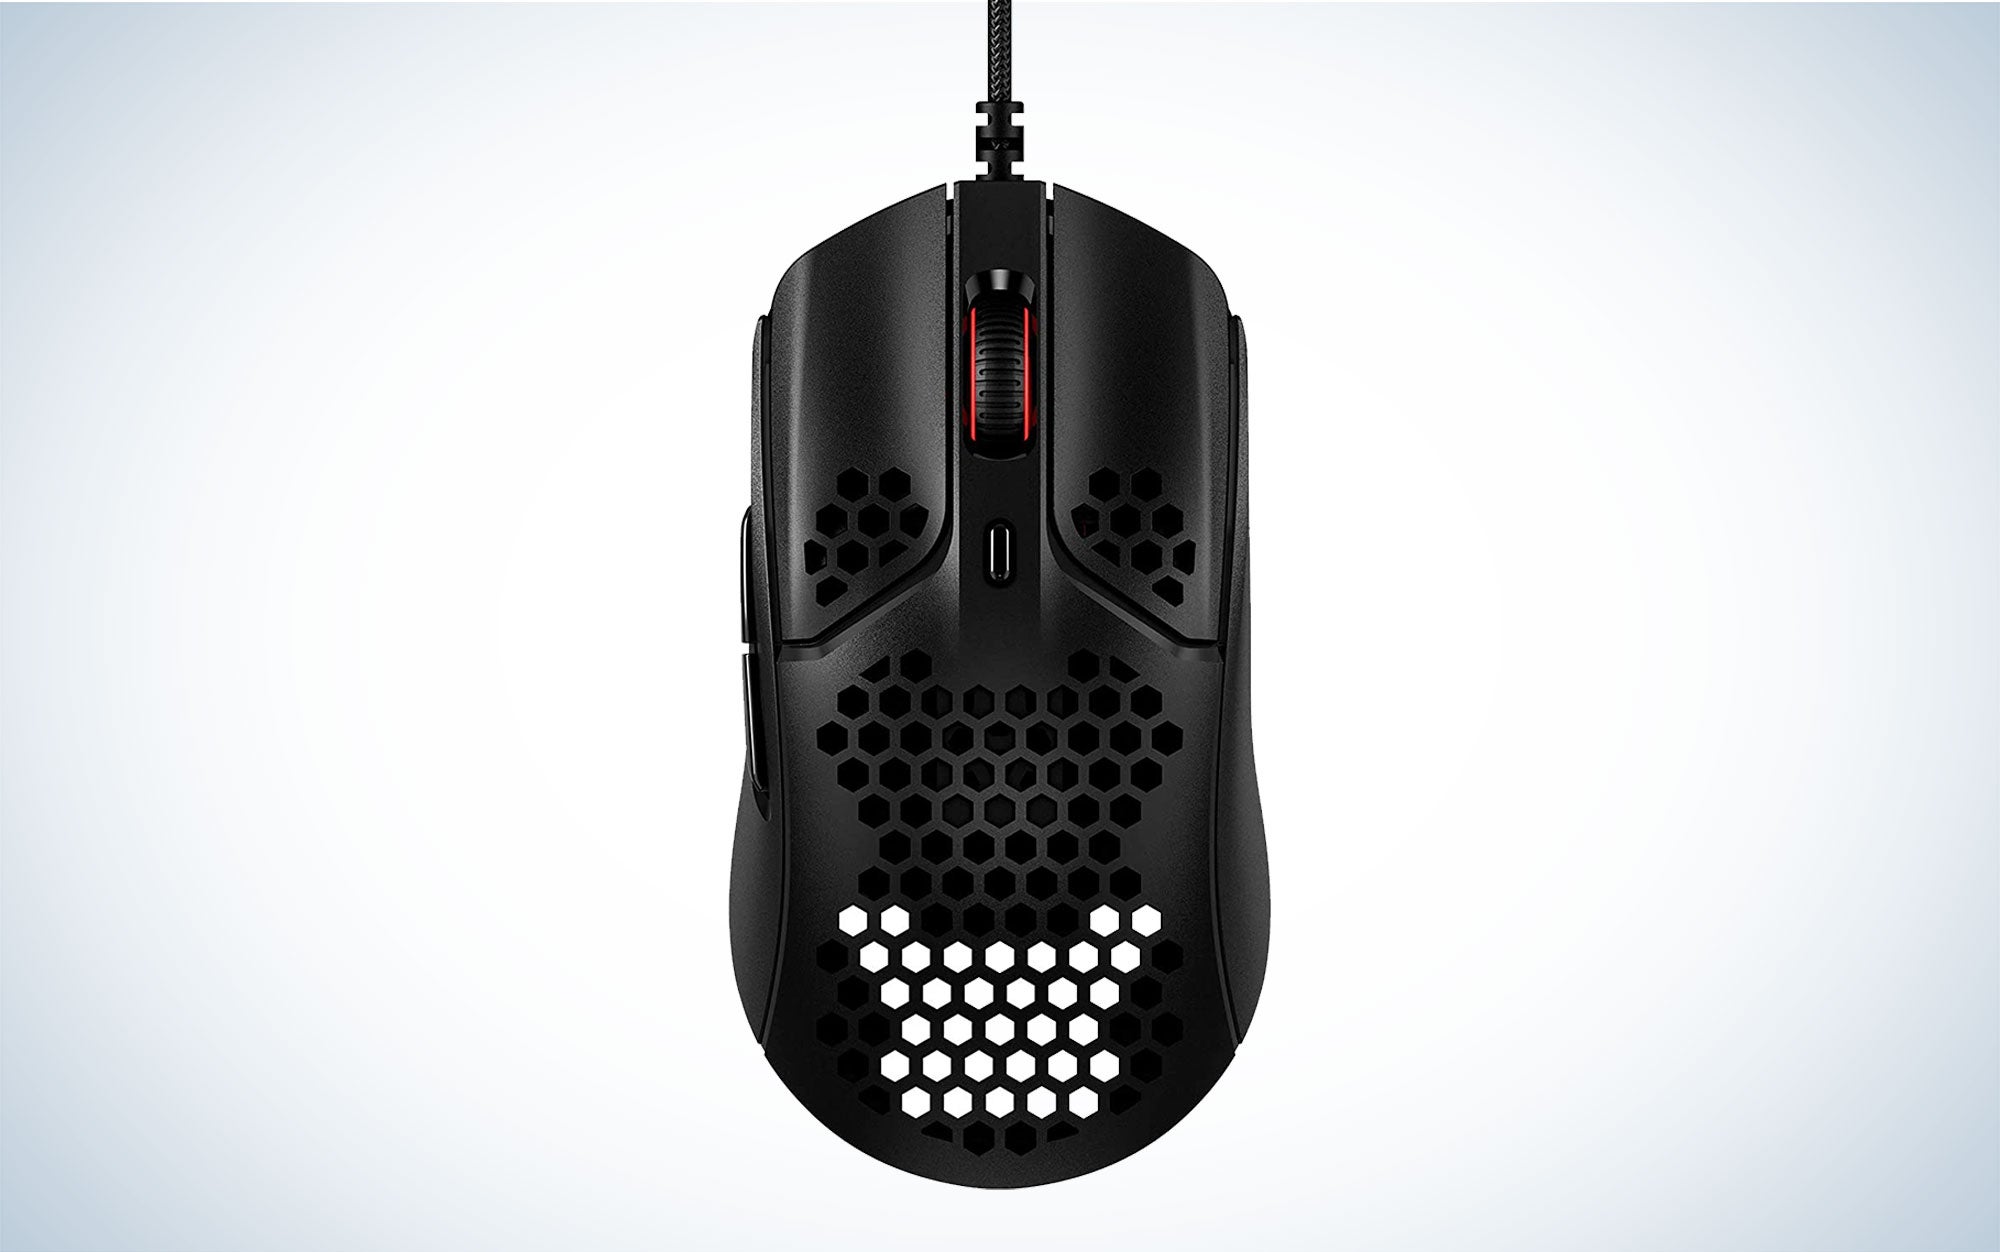 The HyperX Pulsefire Haste is the best Cheap Gaming mouse.